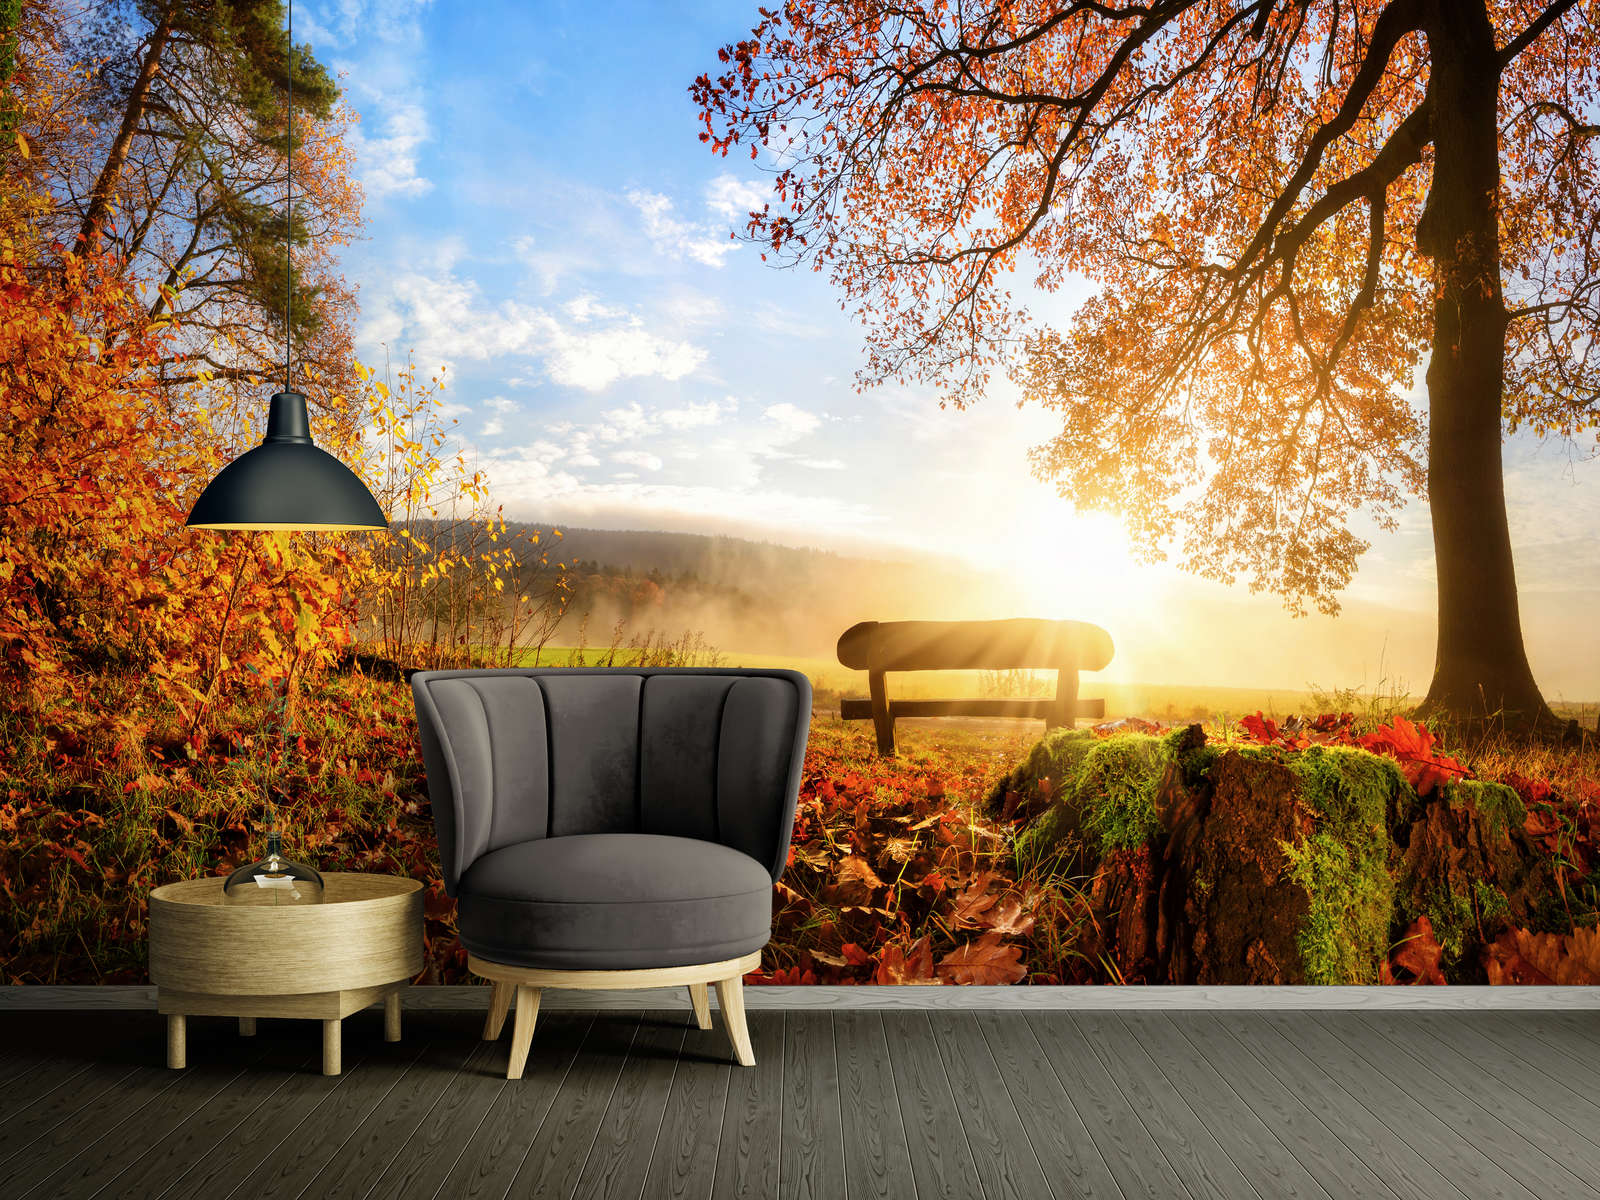             Photo wallpaper Bench in the Forest on an Autumn Morning - Textured non-woven
        